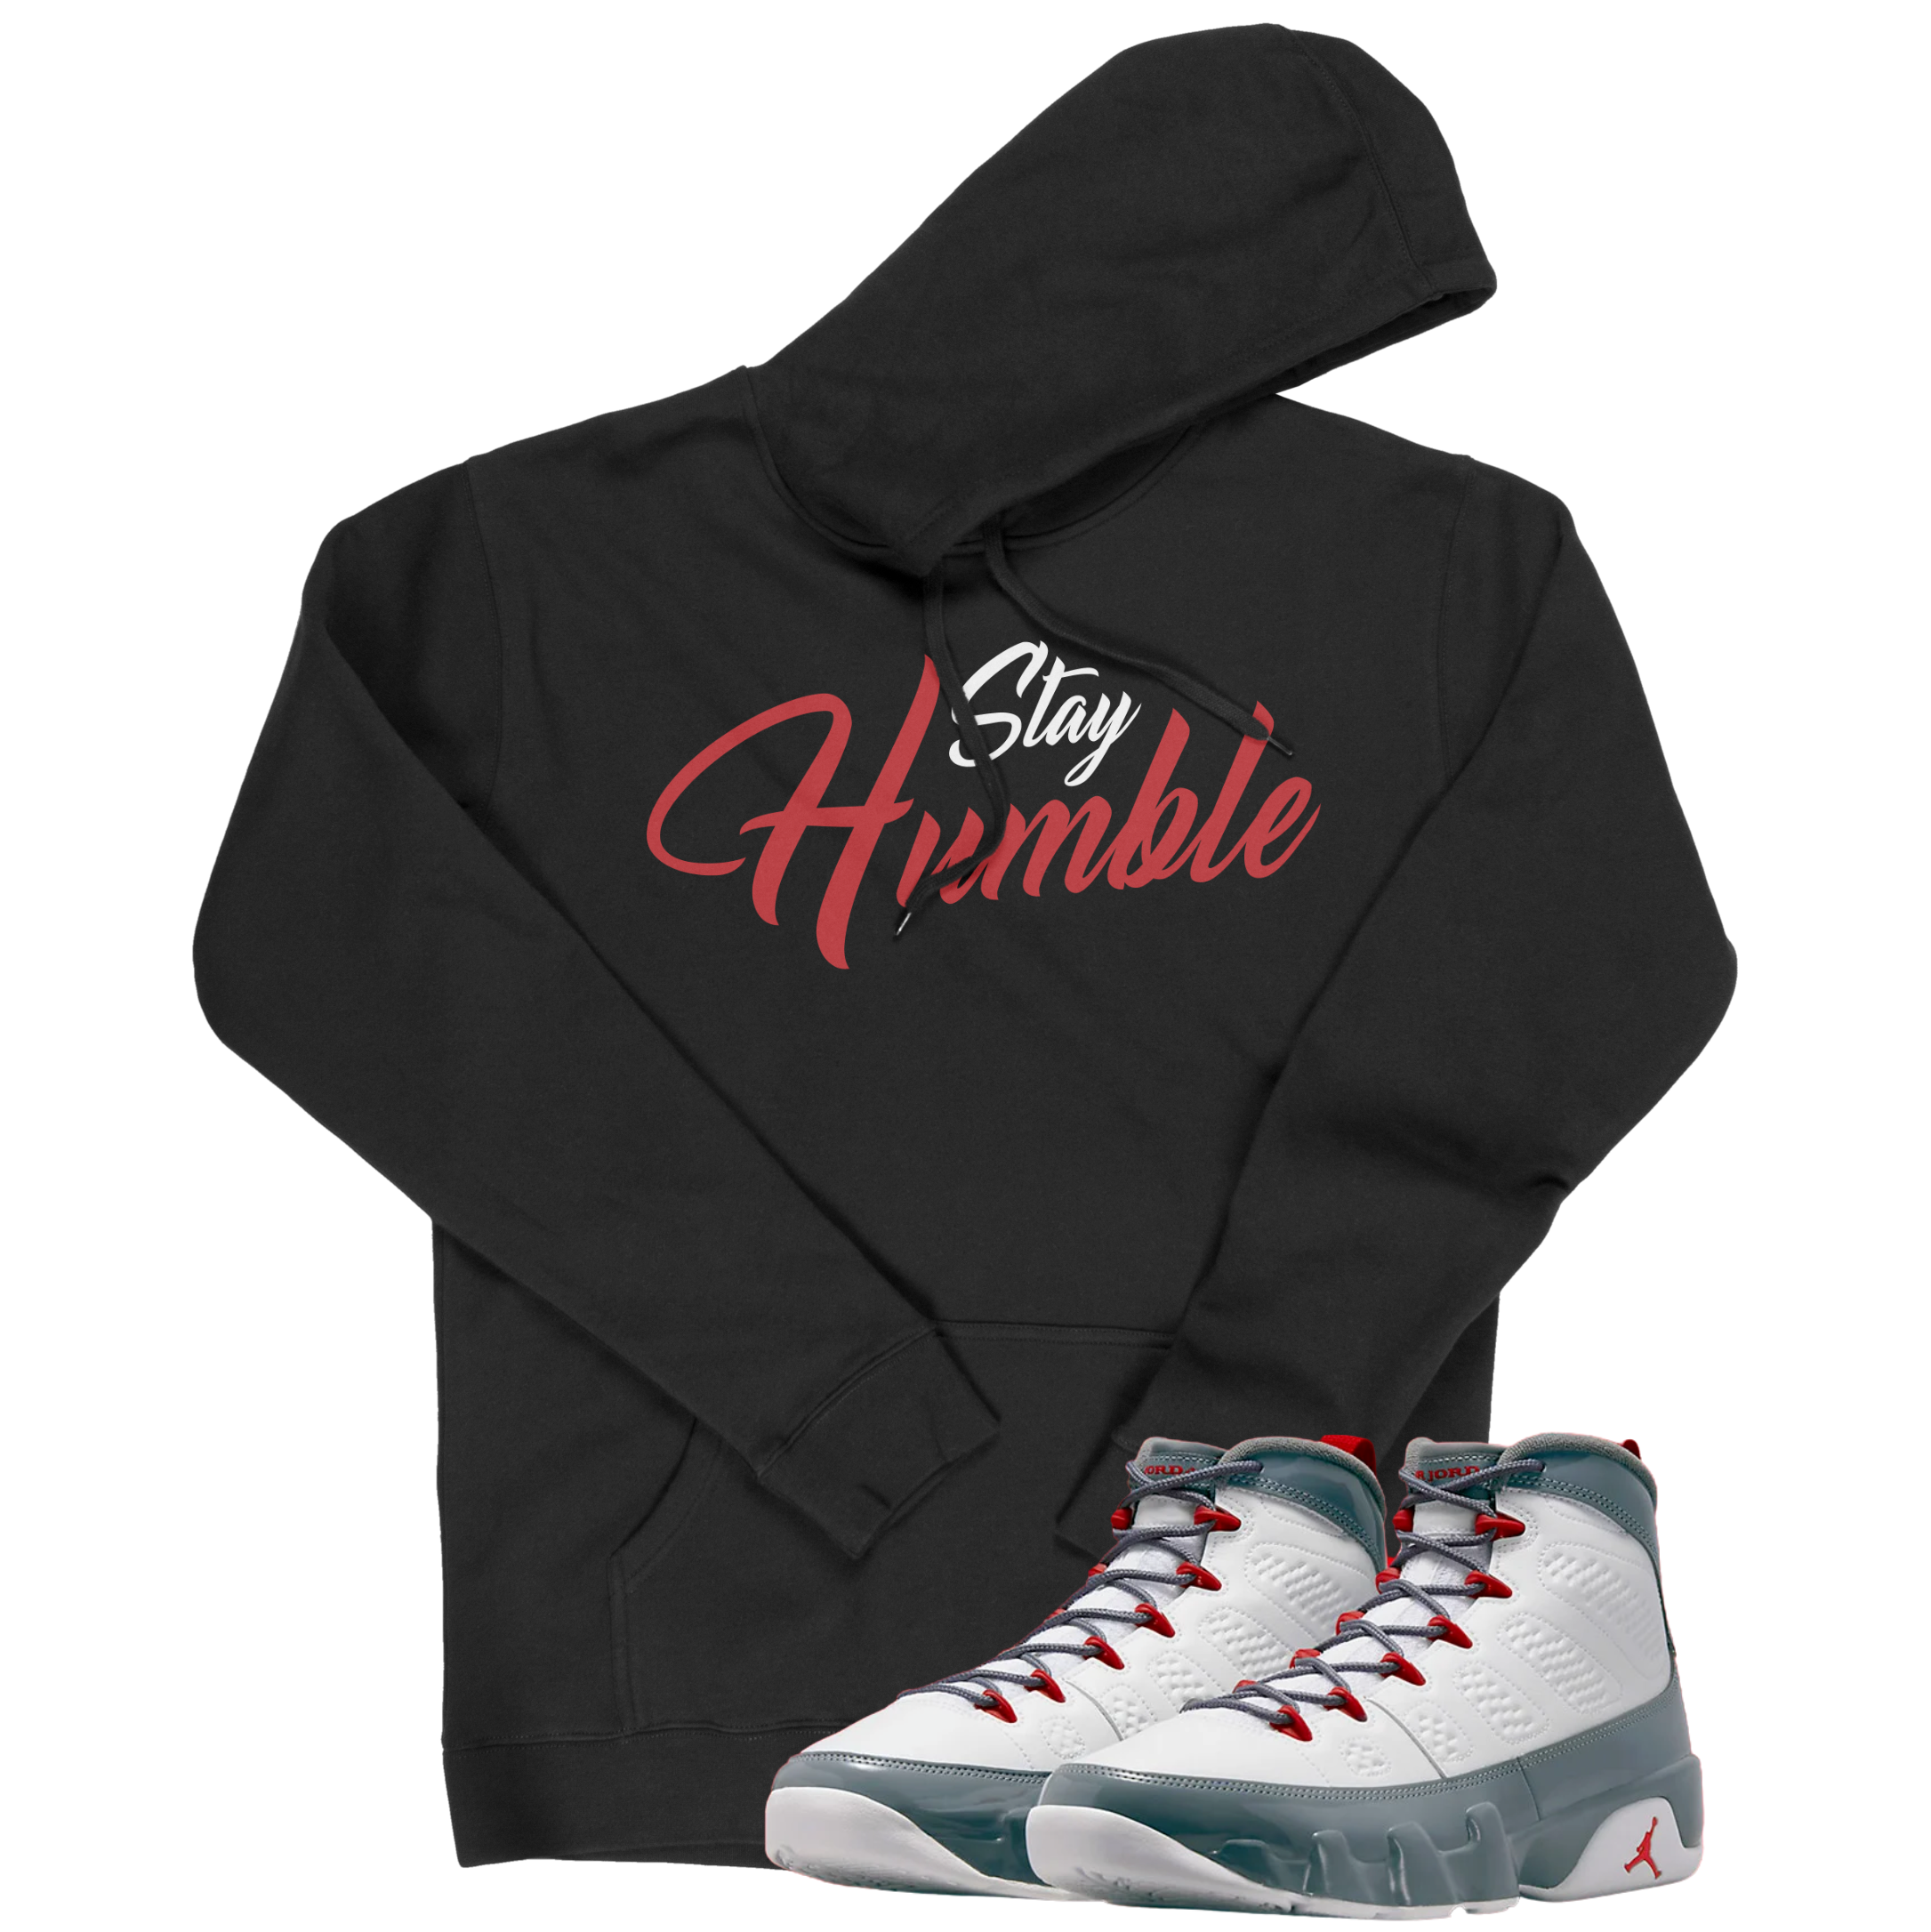 Air Jordan 9 Fire Red I Stay Humble Script Hoodie | Air Jordan 9 Fire Red | Sneaker Match | Jordan Matching Outfits